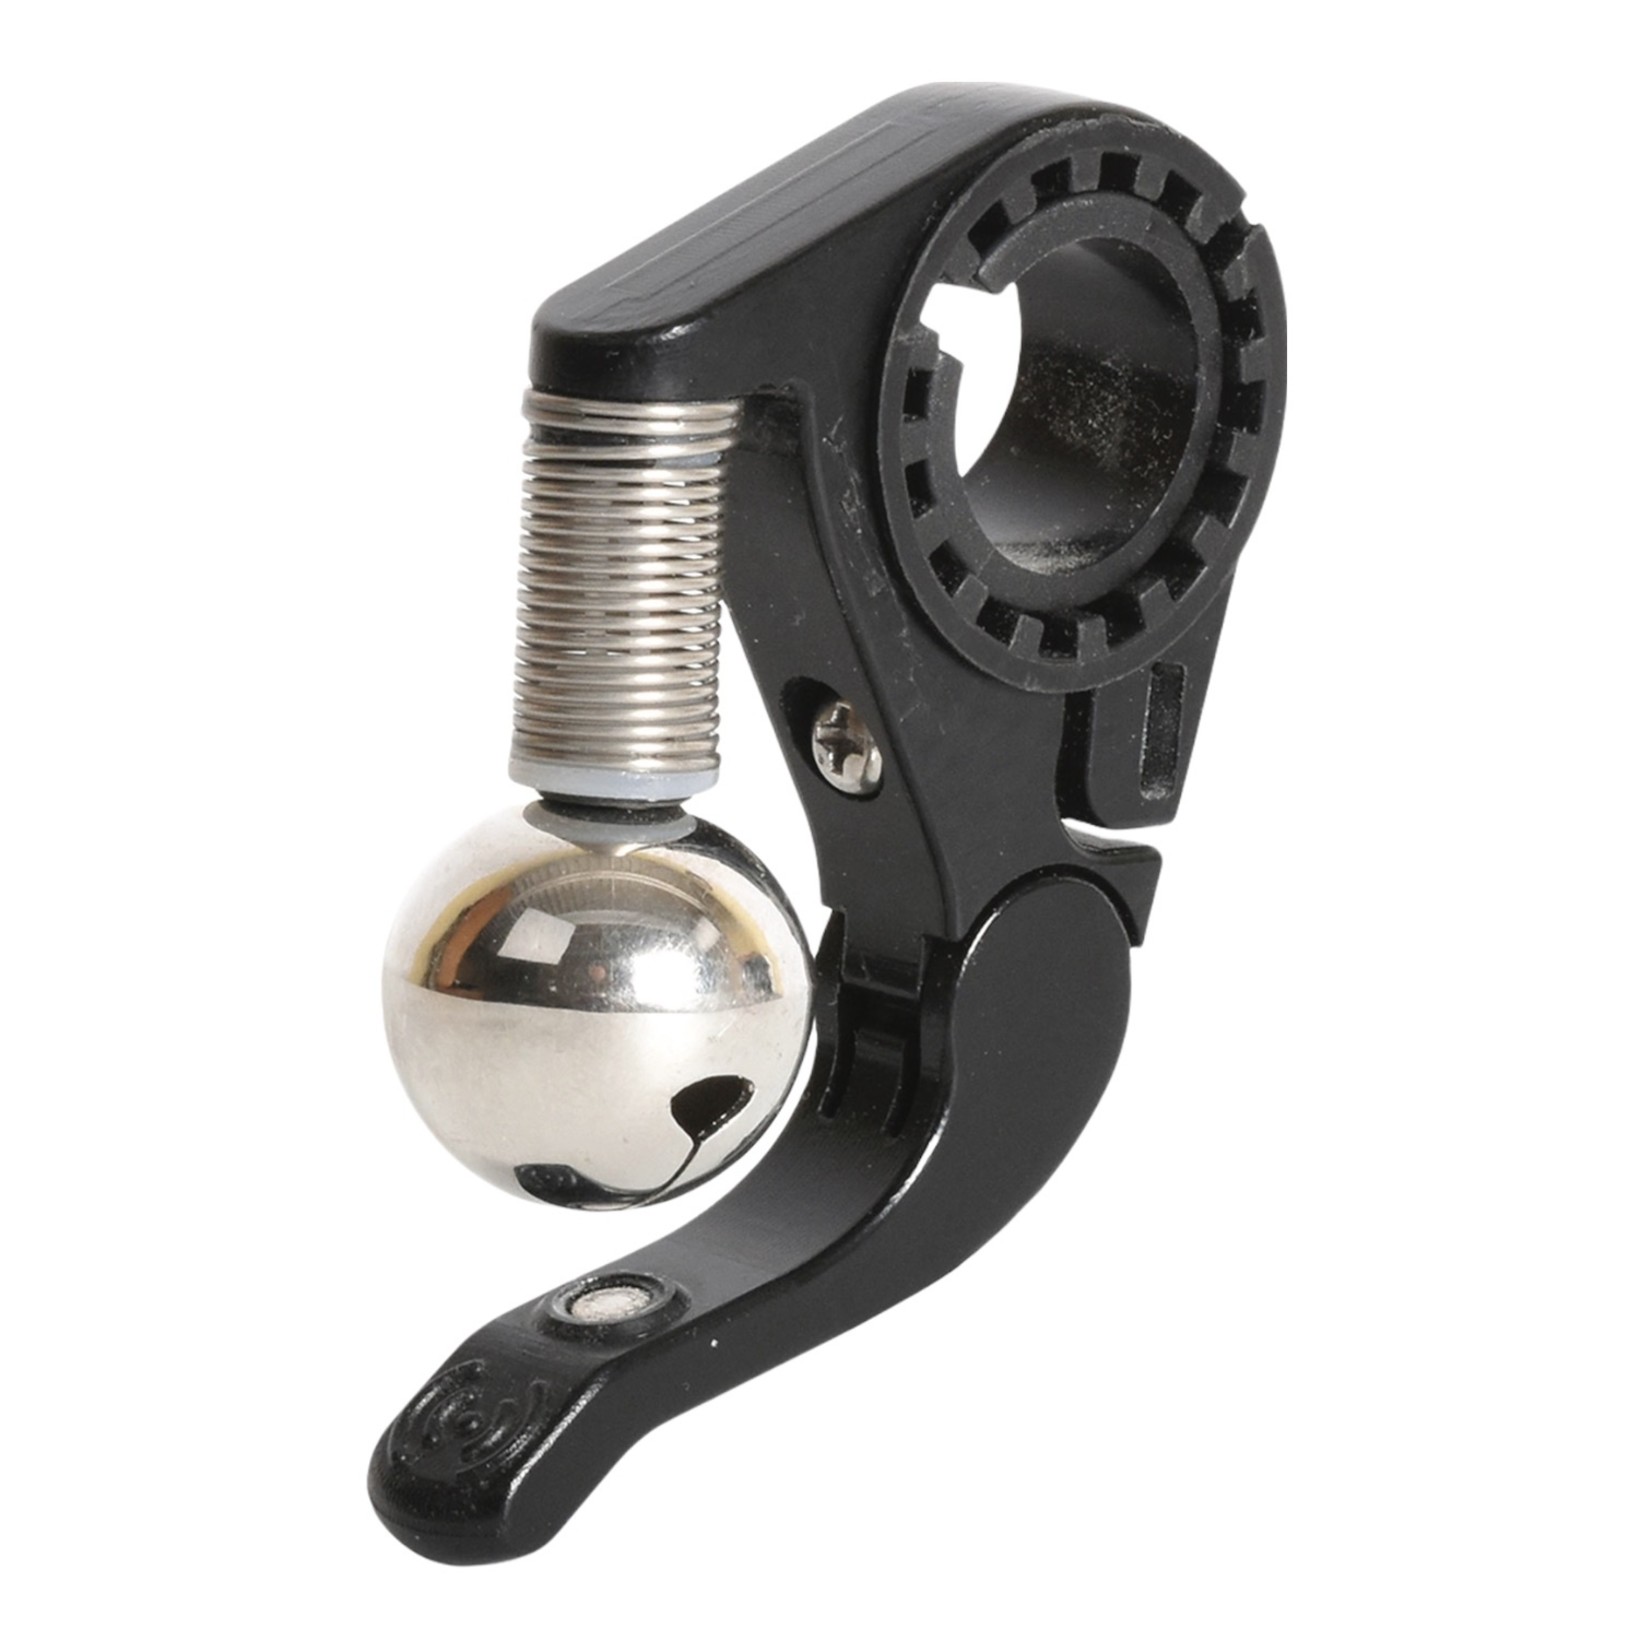 Mirrycle, Incredibell Trail Bell, Bell, Black